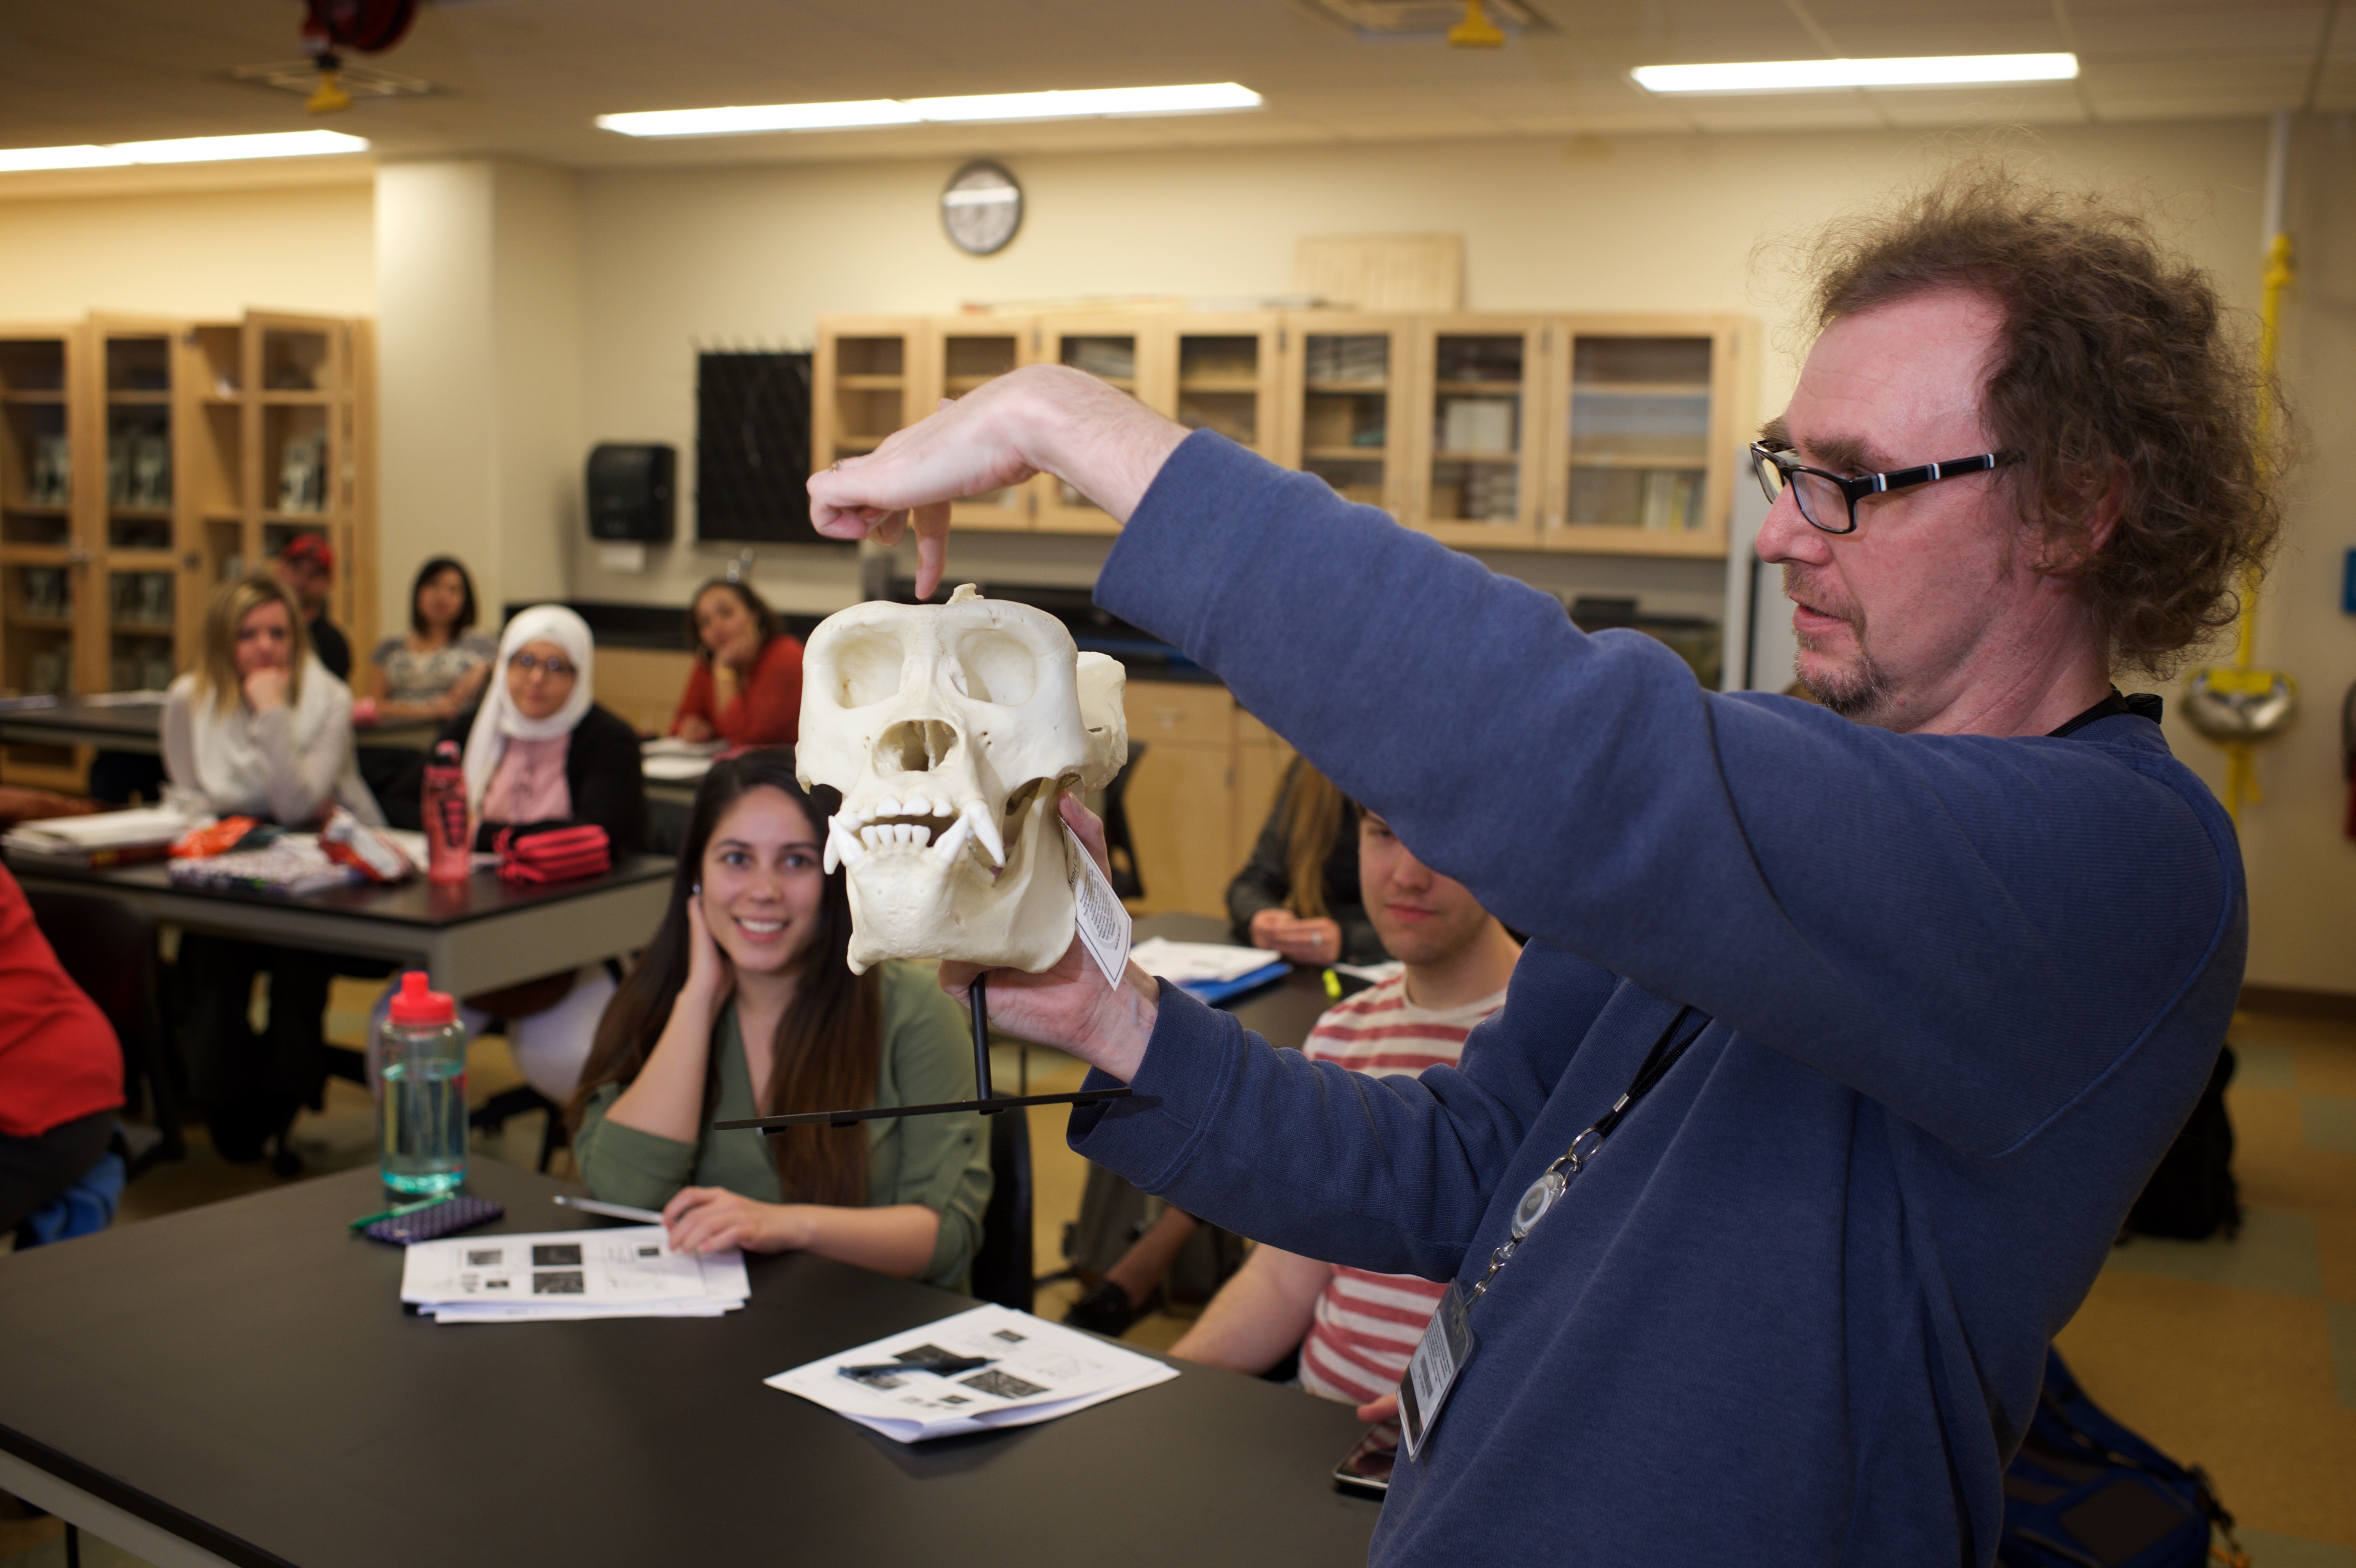 An instructor discusses a primate skull with a class